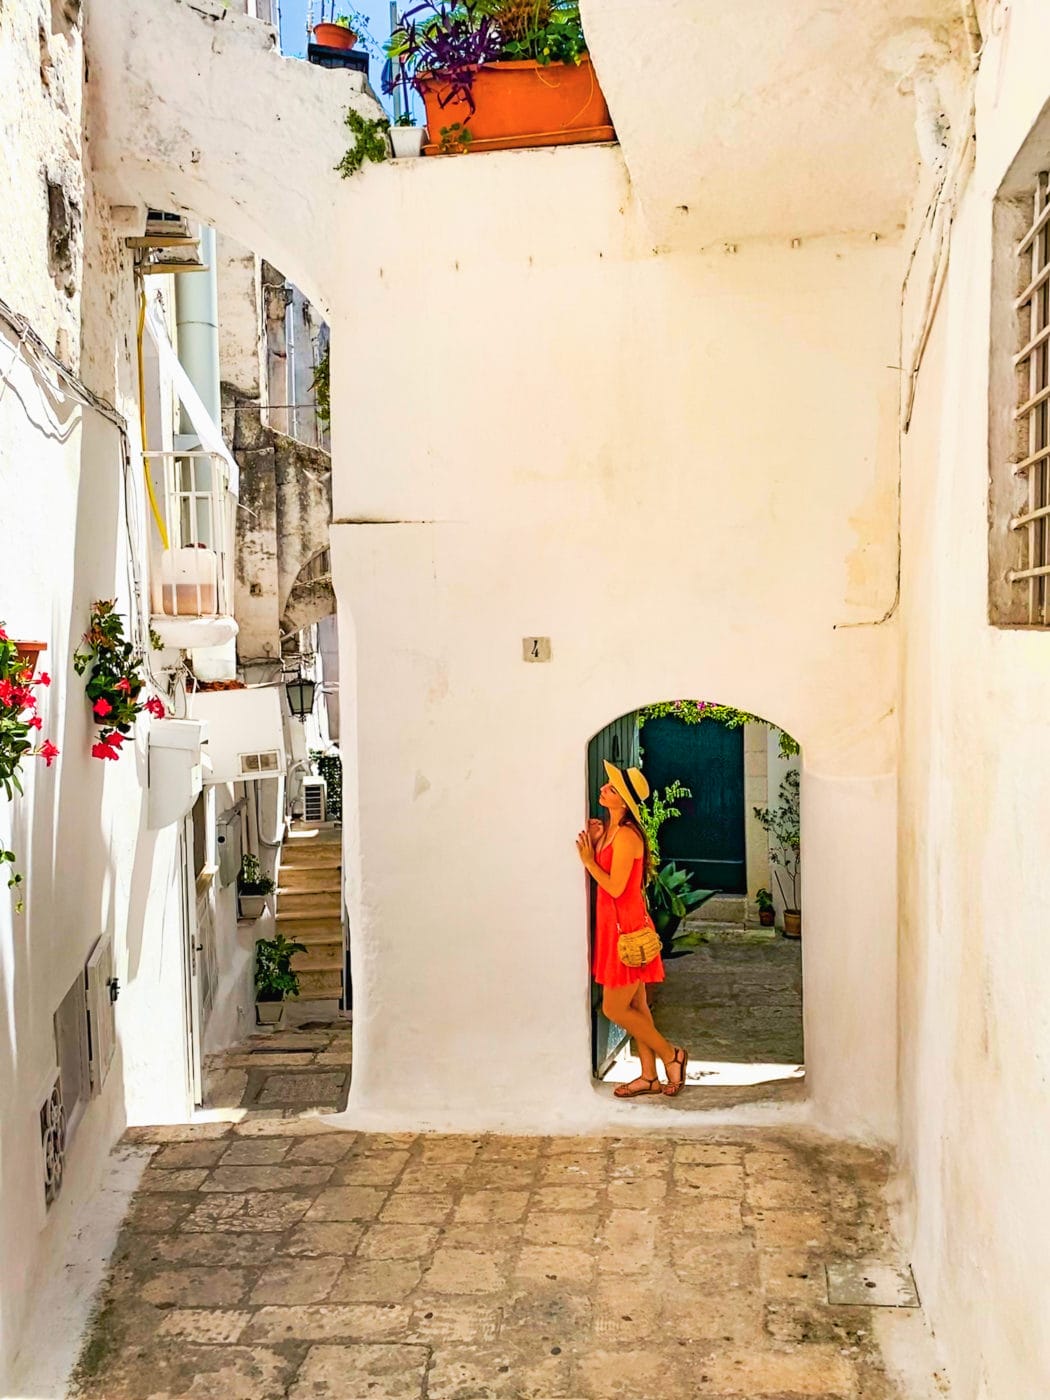 A woman in red dress and straw hat leaning against the archway of a whitewashed building in Ostuni, Puglia Italy